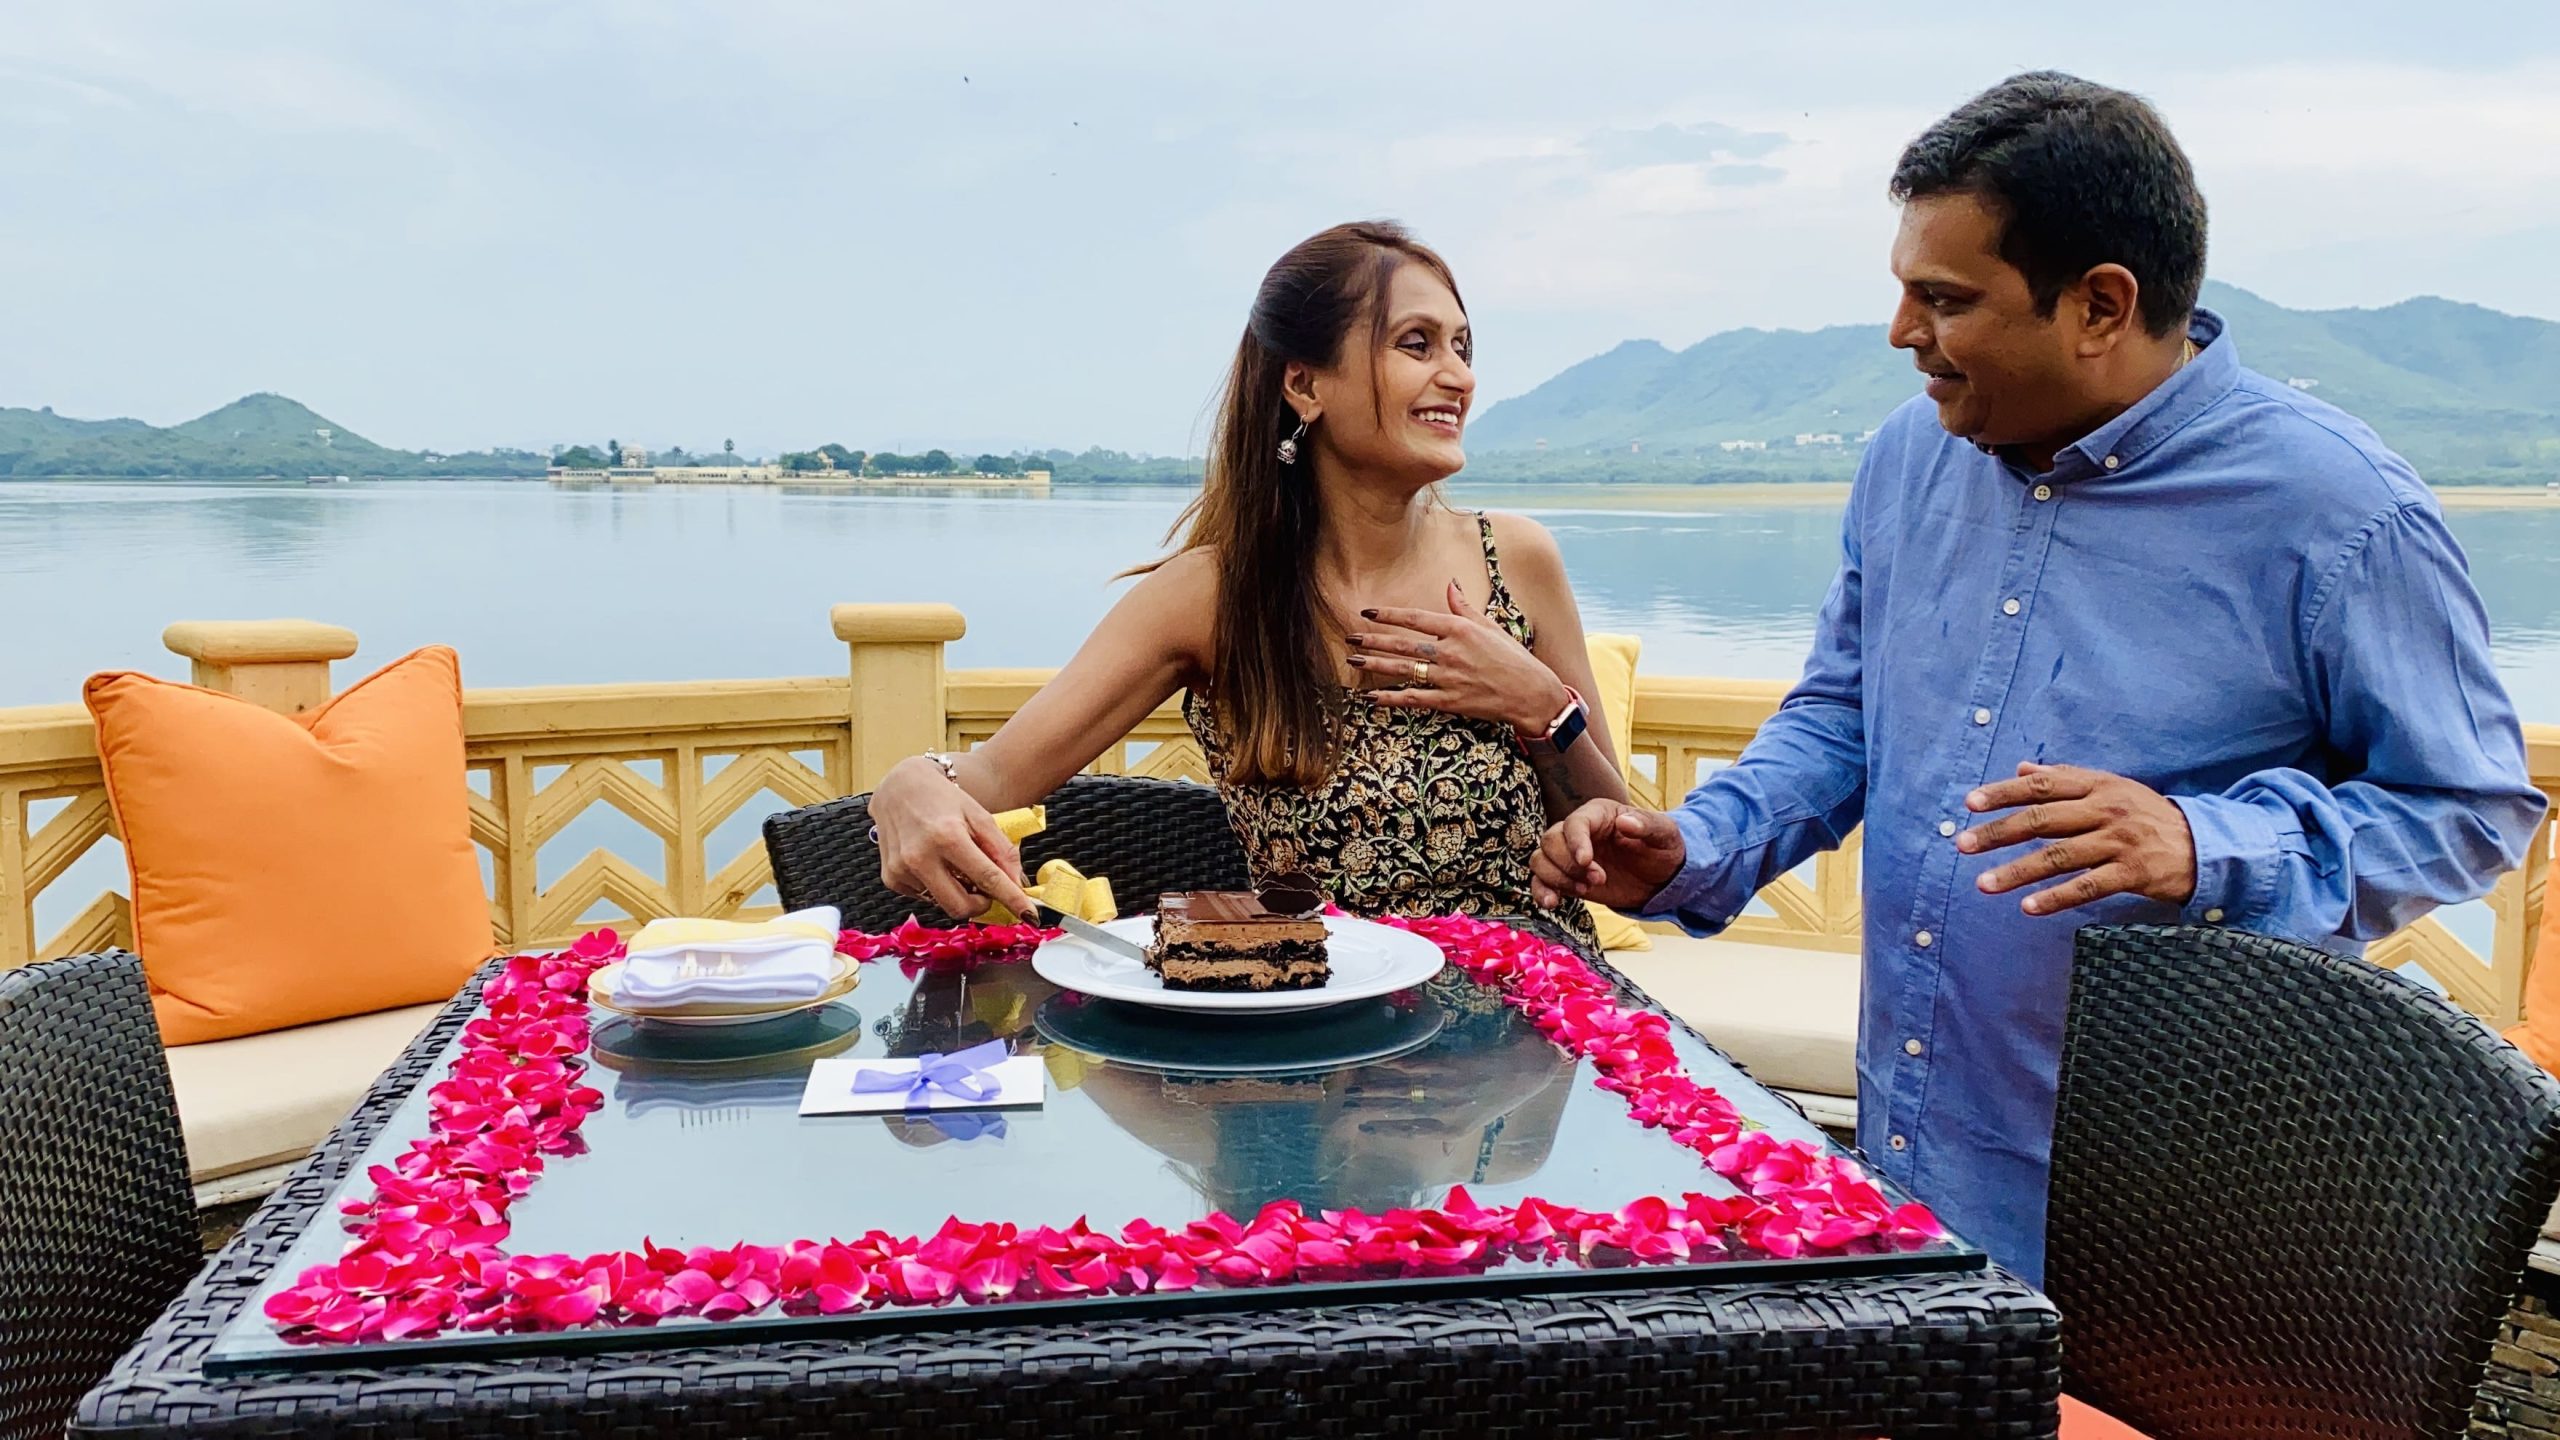 Celebrate Love in the Royal Splendor of Rajasthan with Exclusive Valentines Week Tour Packages